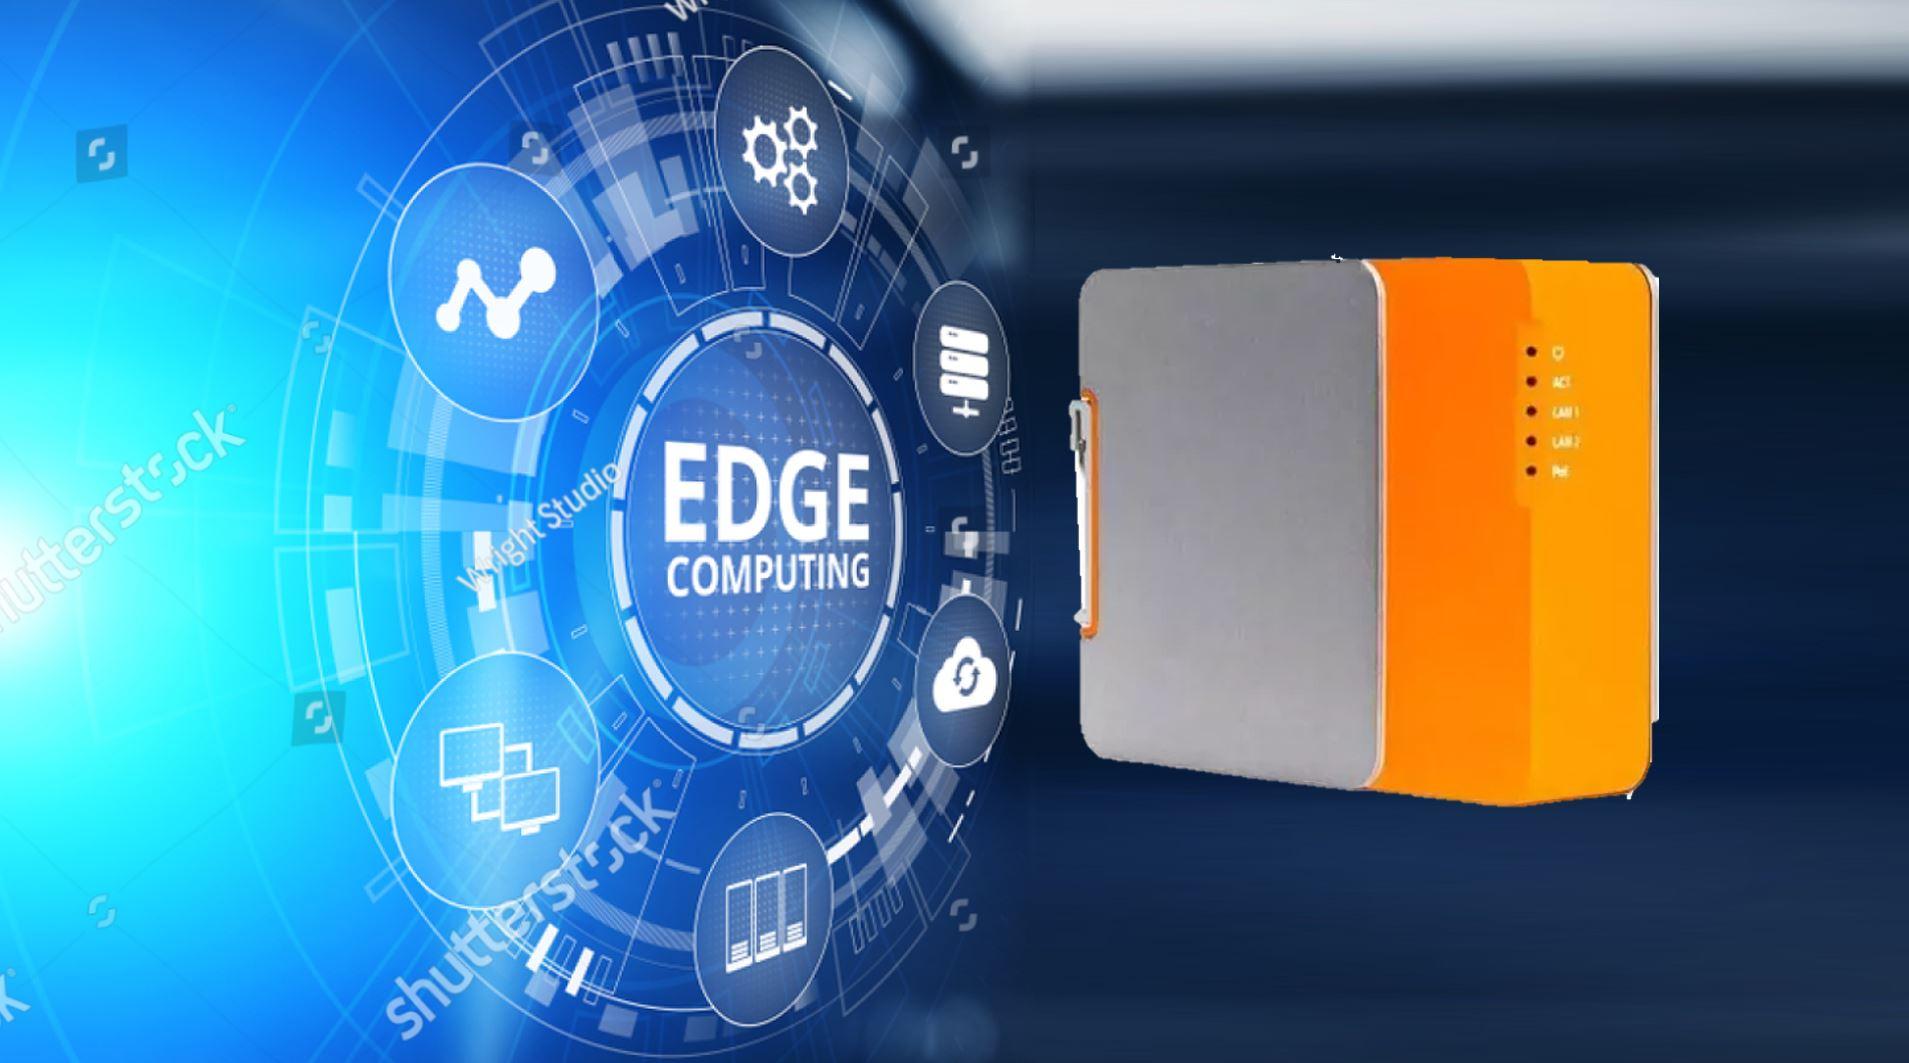 All-in-one Edge Monitoring Device